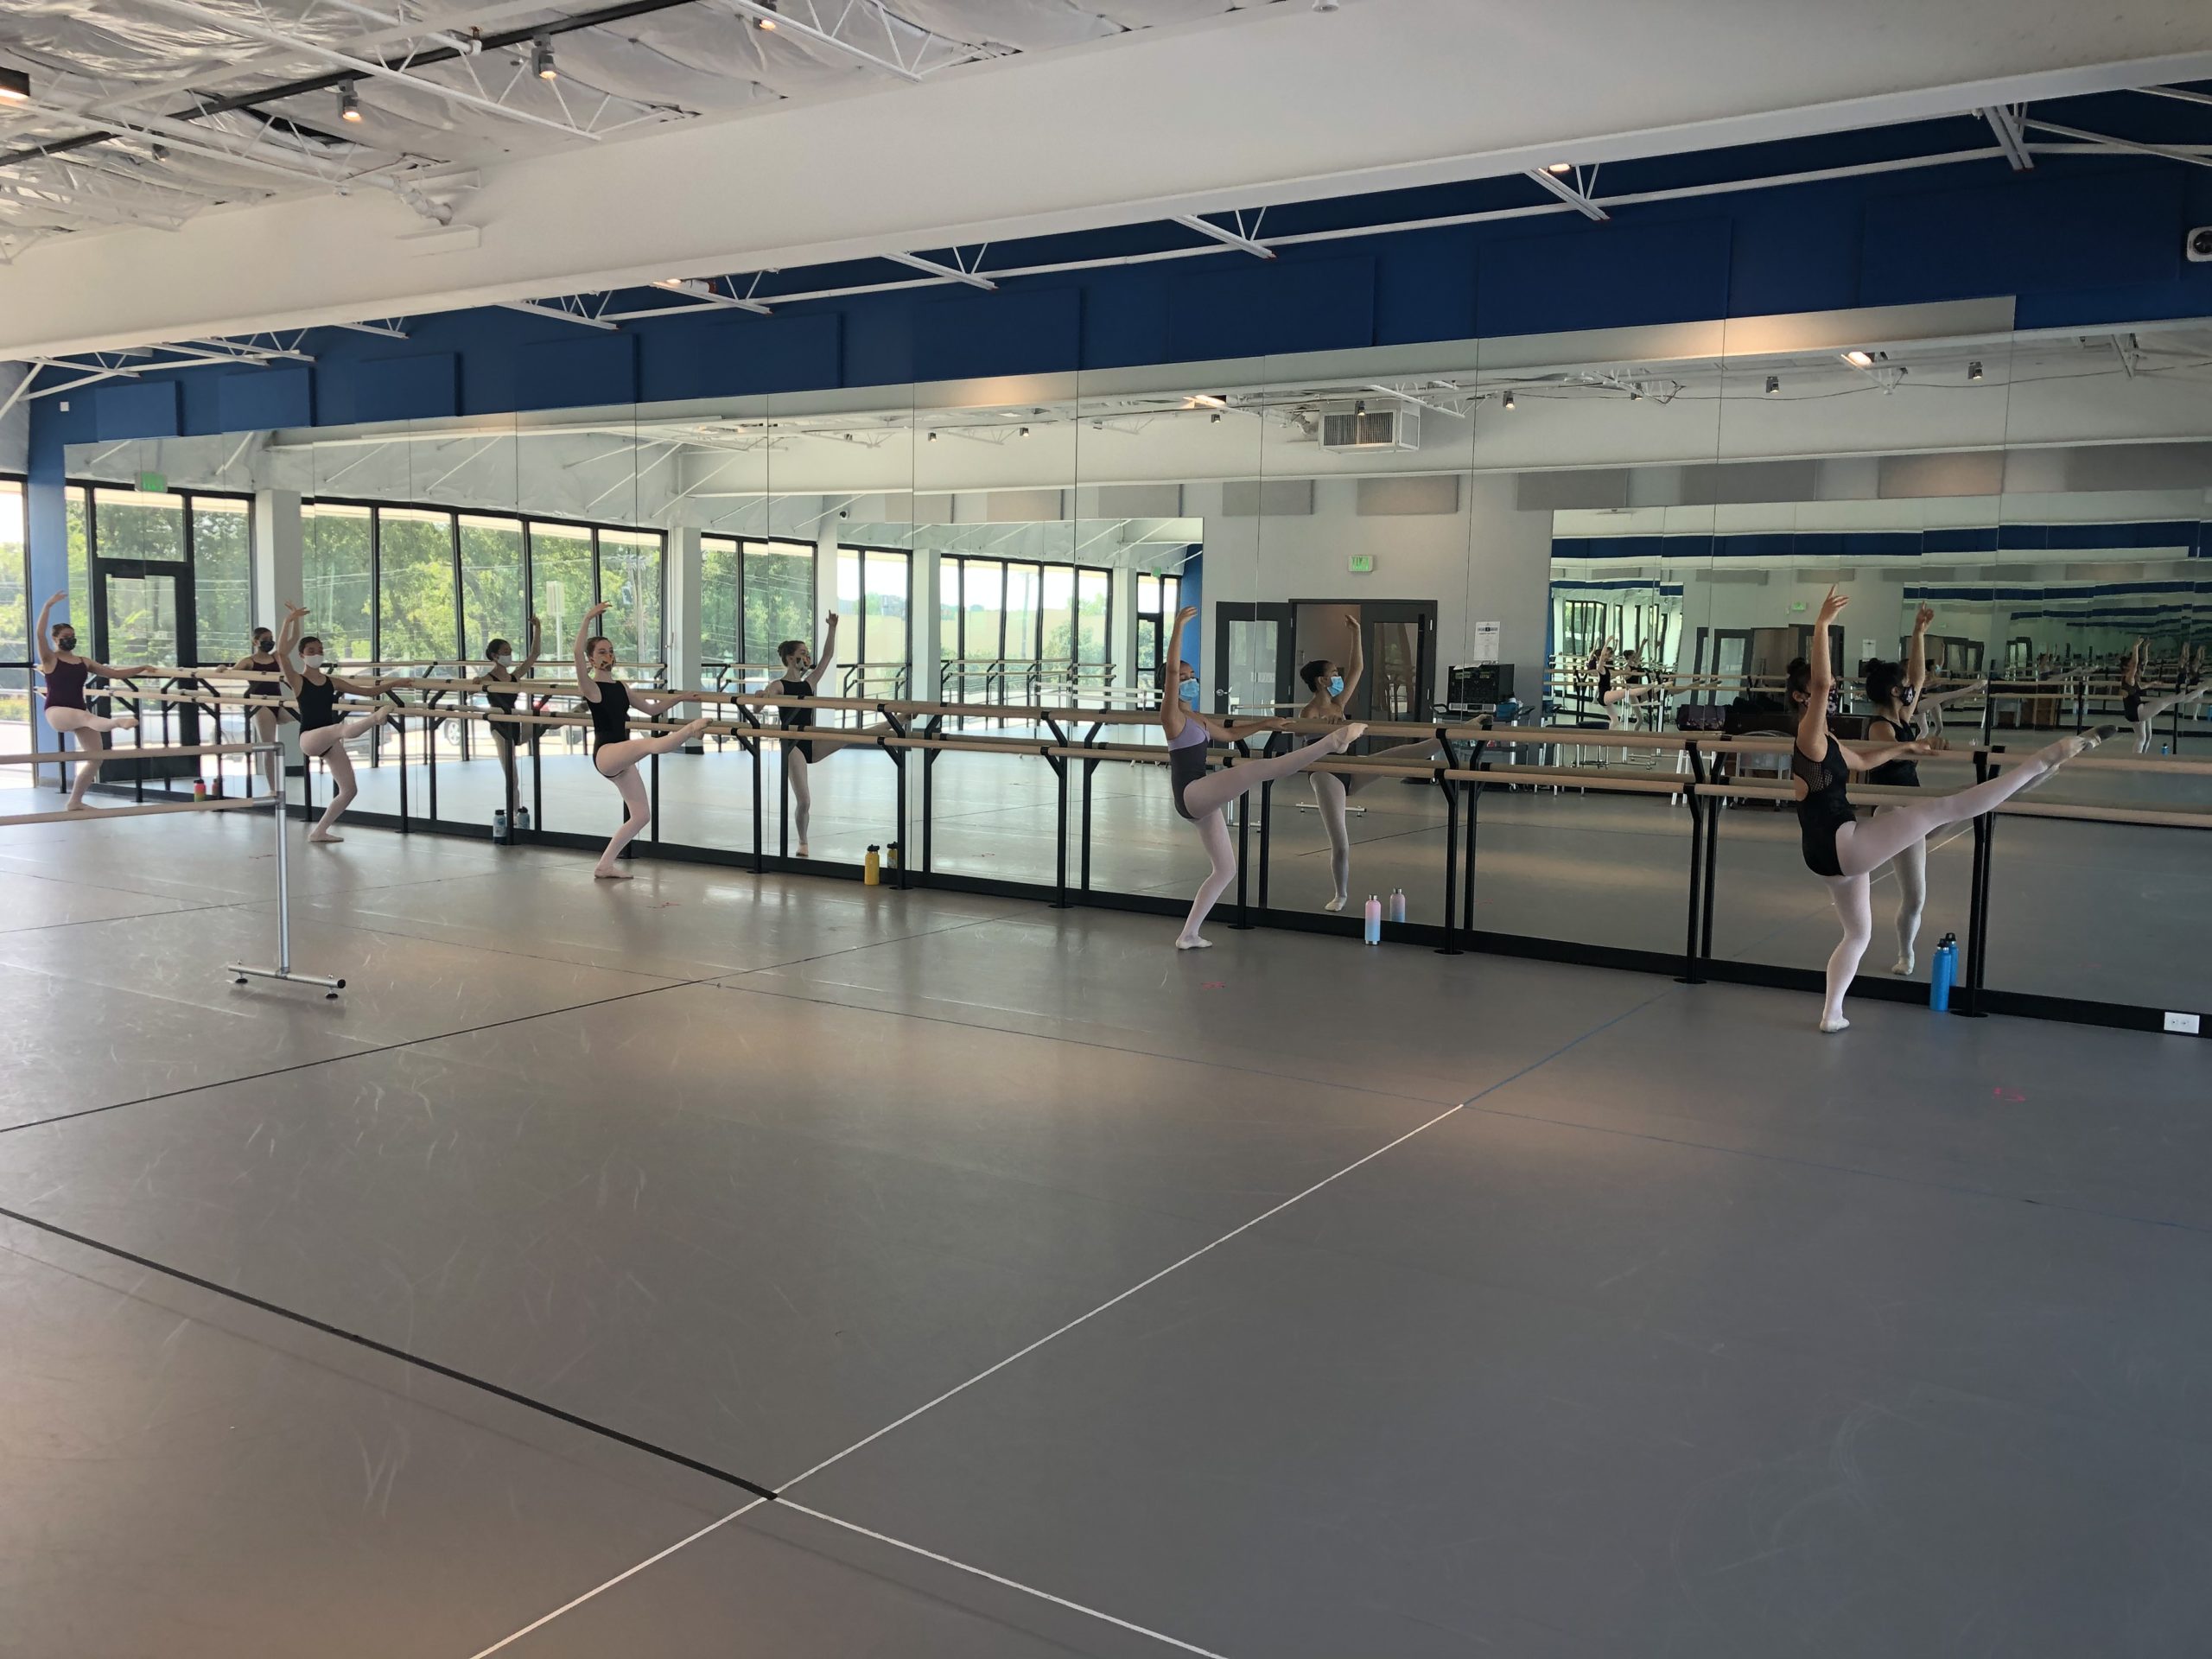 Ballet students in class, wearing masks and socially distanced at the barre.